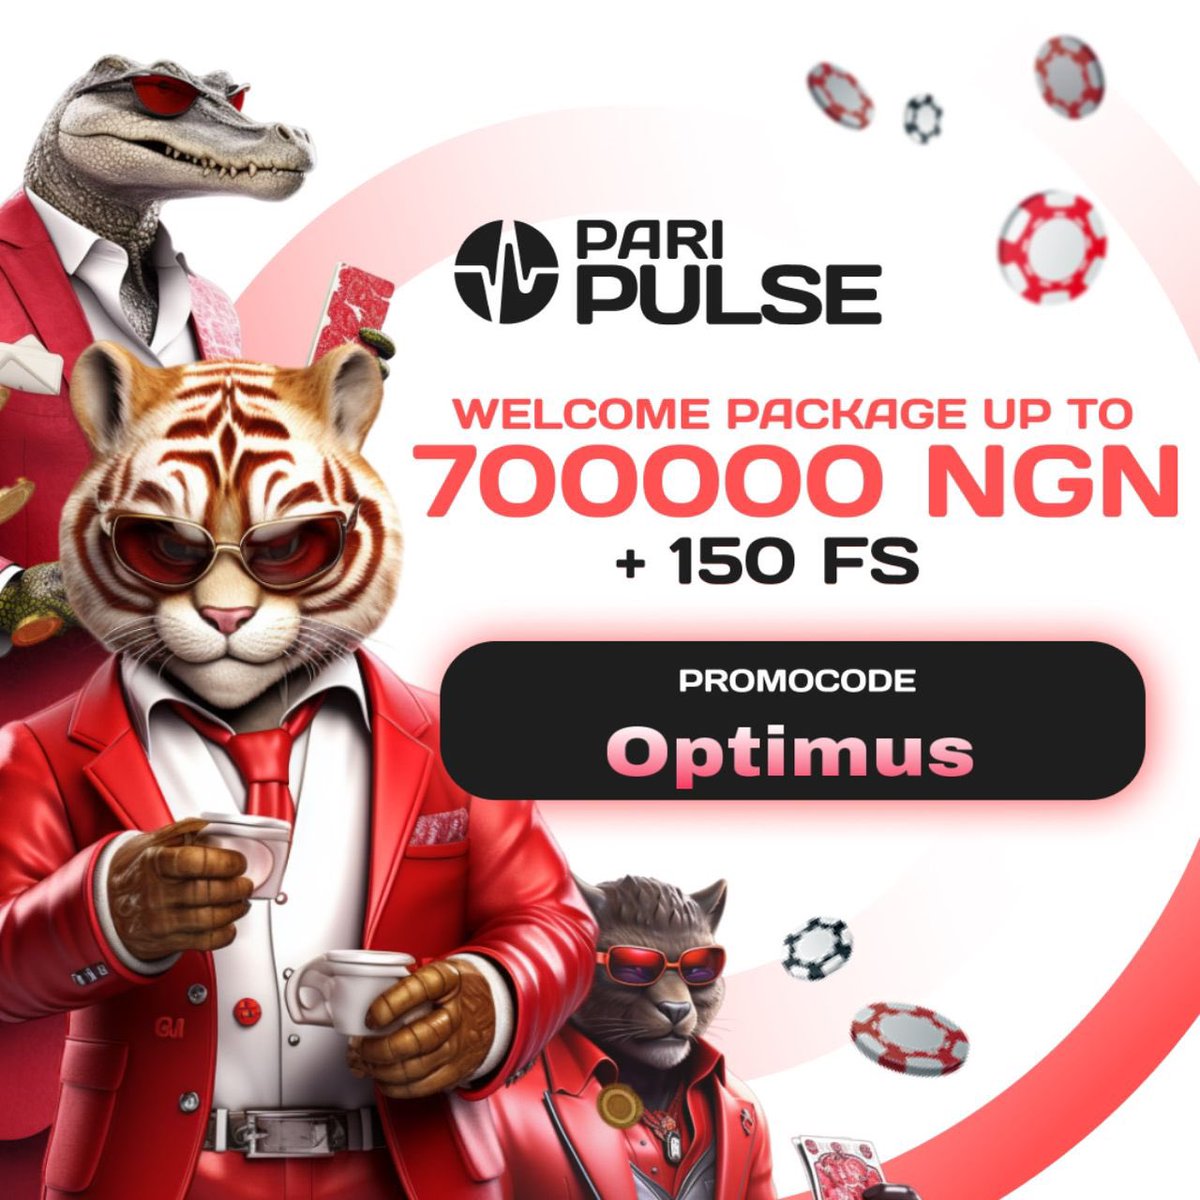 🏀 ✅SIGN UP ON PARIPULSE 🔅Register here with your EMAIL 👉 pari-pulse.com/Opt 🔅Use Promocode: 👉 OPTIMUS 🔅Activate ur Email 🔅Login & Fill personal Details 🔅Deposit & let’s Play 💵 @oluwapundittt